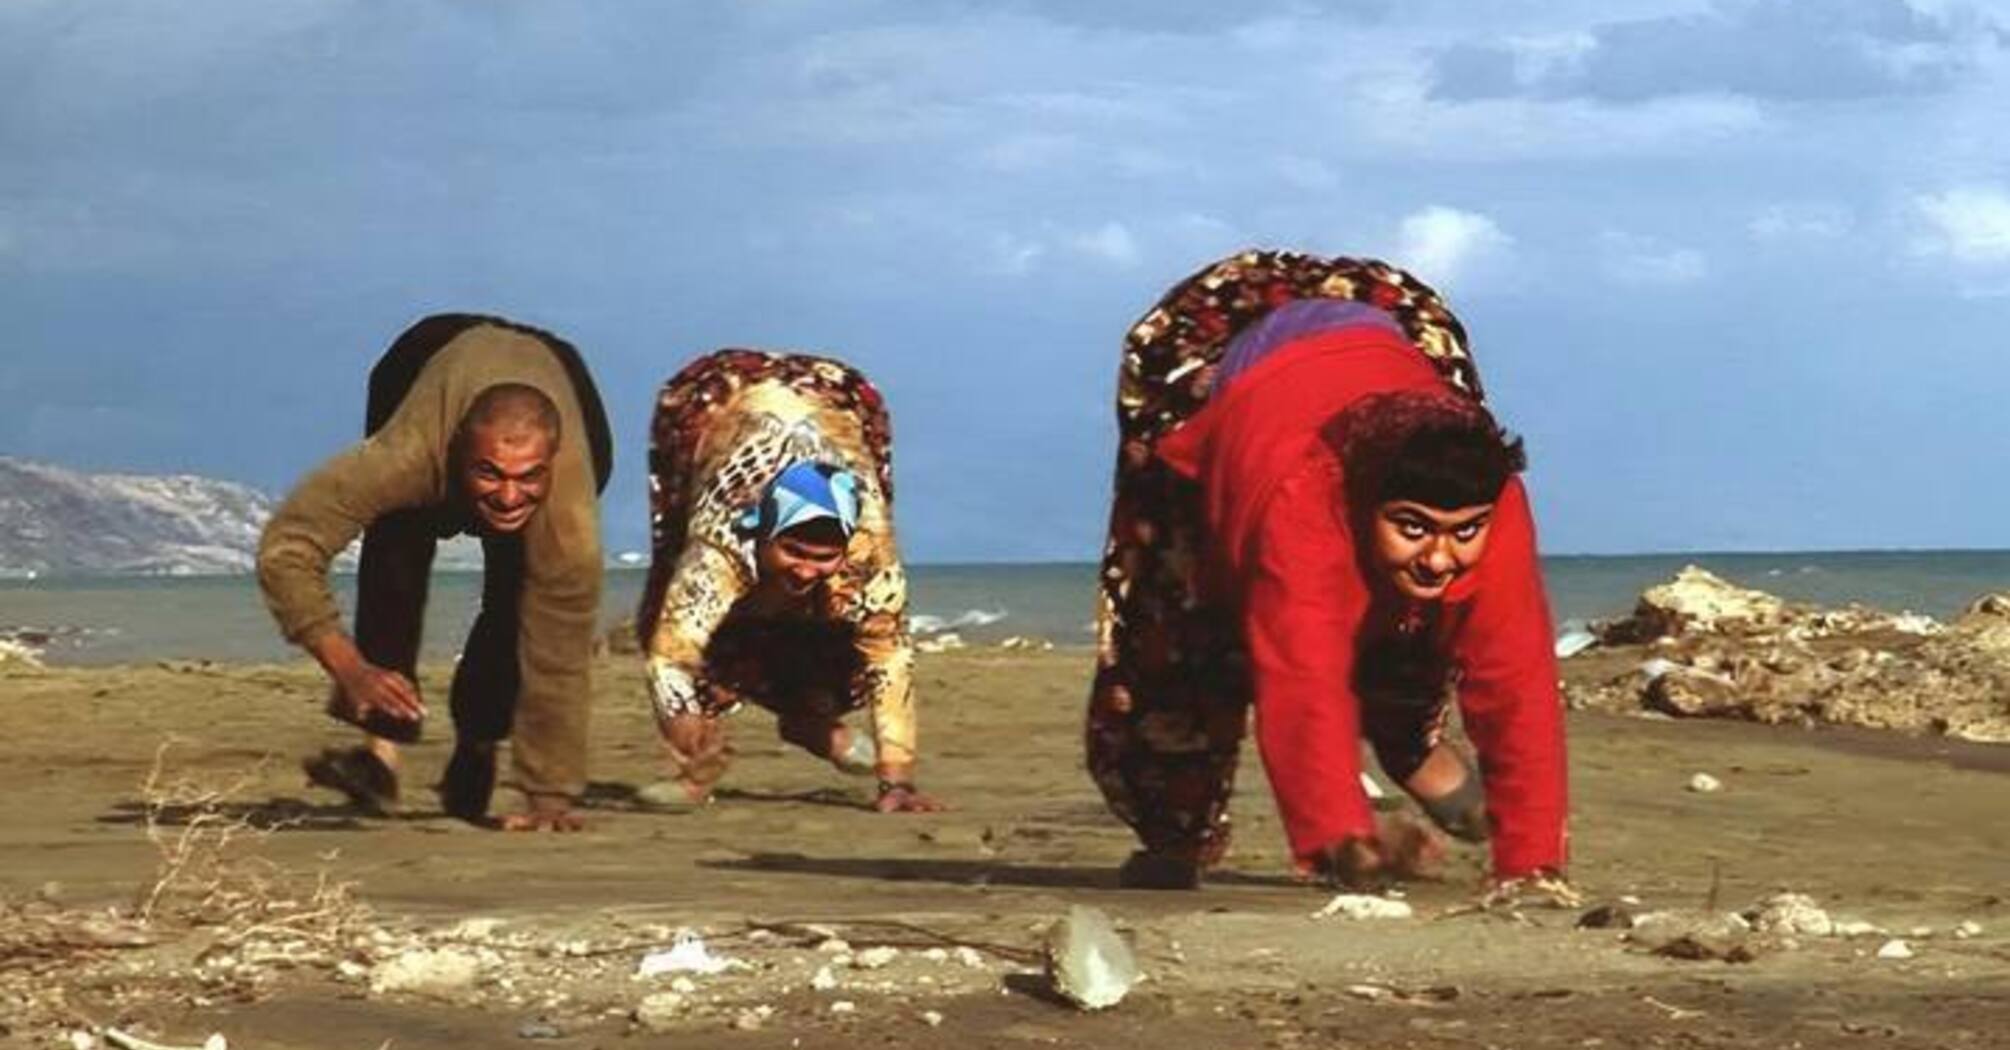 The mysterious story of the Ulas family from Turkey, whose members walk on all fours